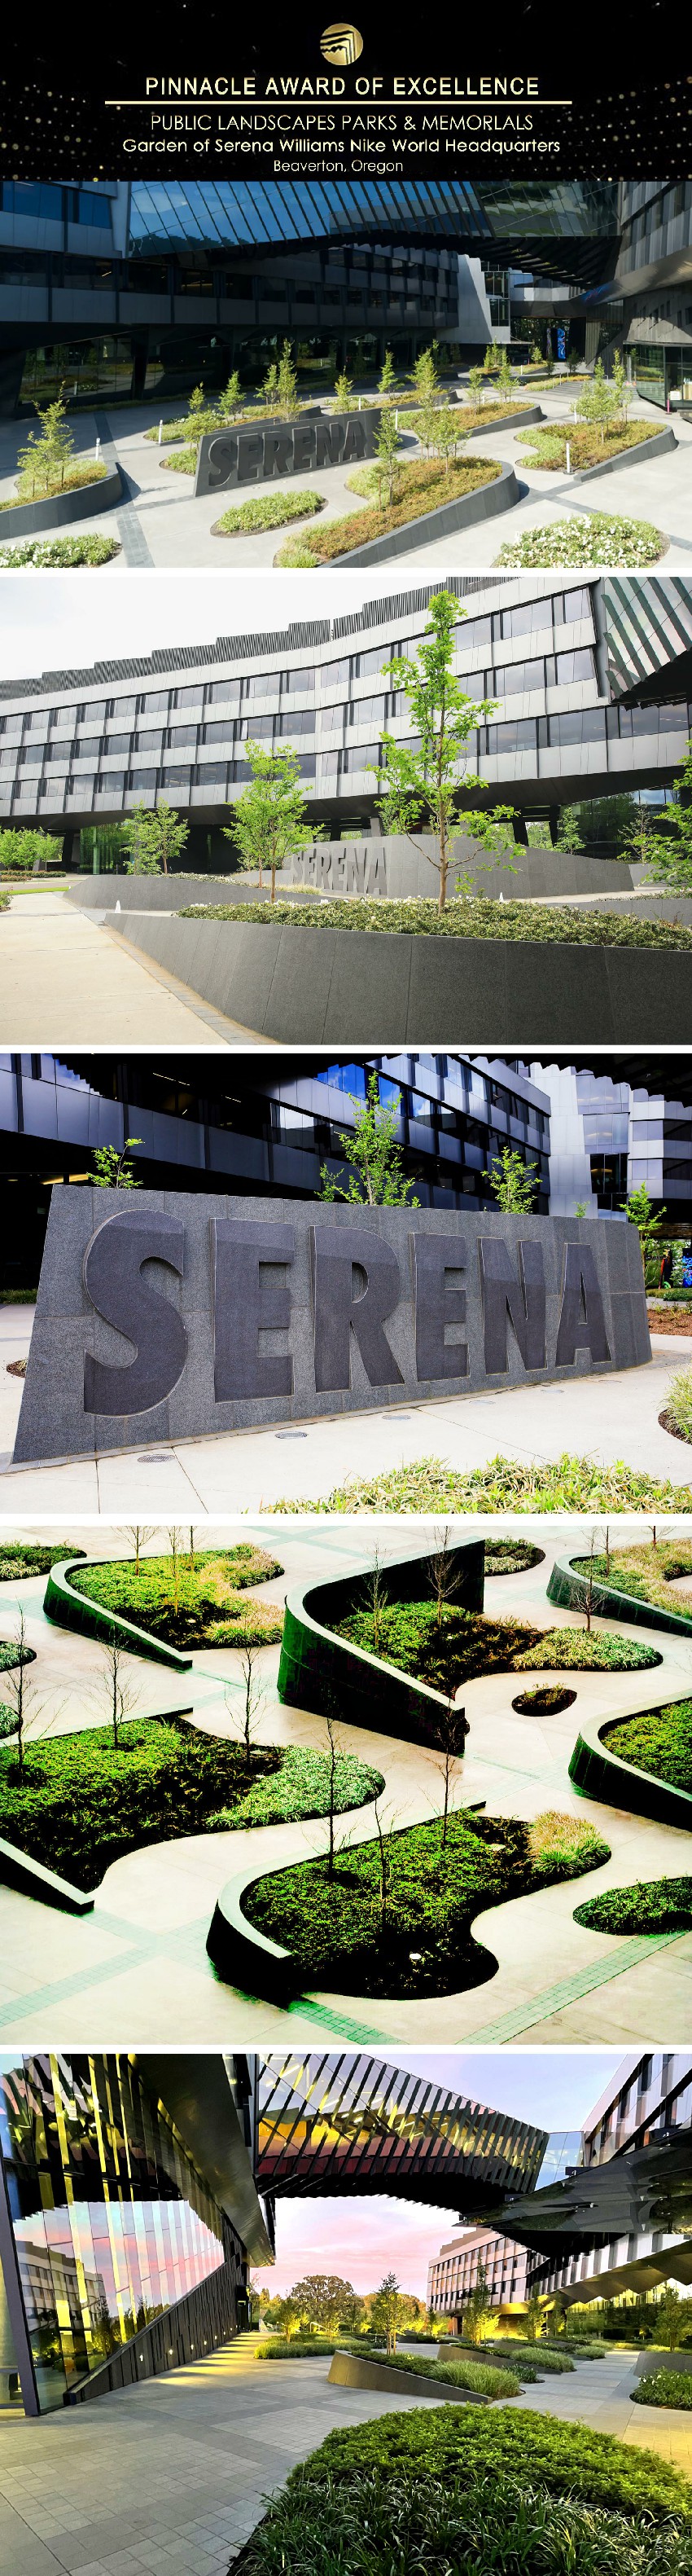 2022 Natural Stone Institute Pinnacle Award of Excellence -Garden of serena williams NIKE world headquarters (Public Landscapes parks & Memorials) 